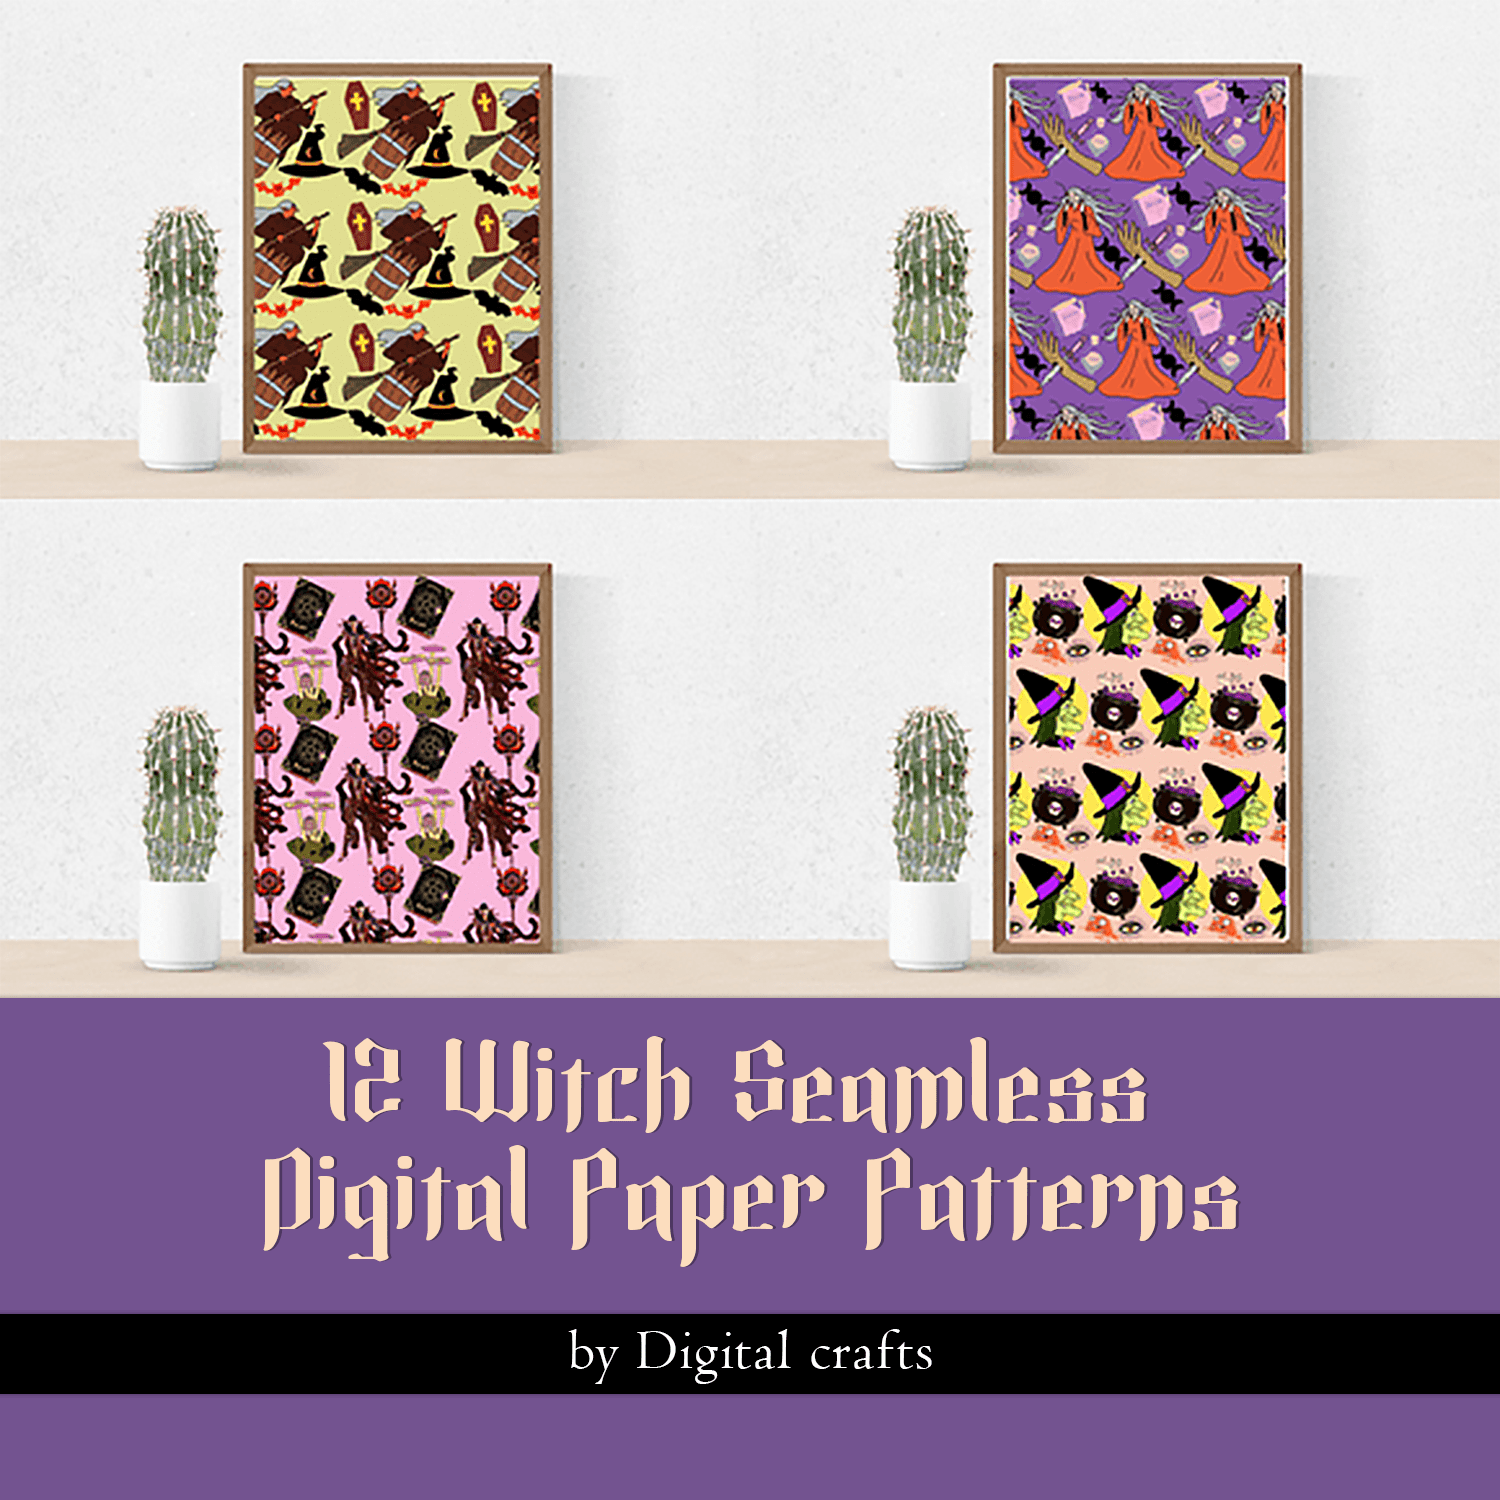 12 Witch Seamless Digital Paper Patterns cover.